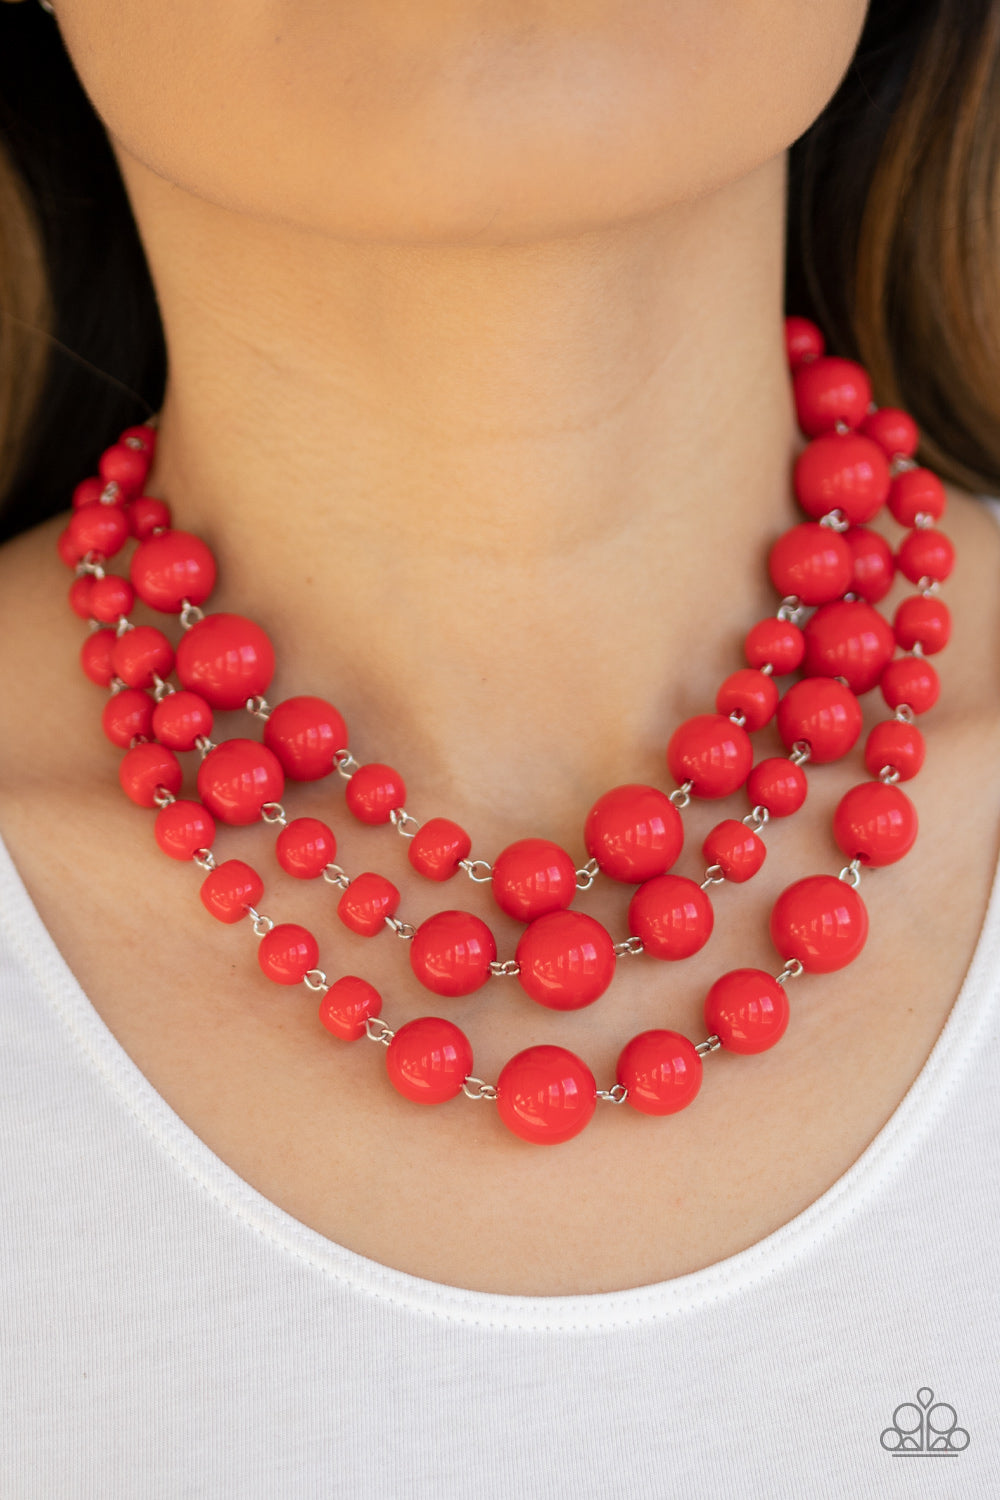 Everyone Scatter - Red Necklace 1006n